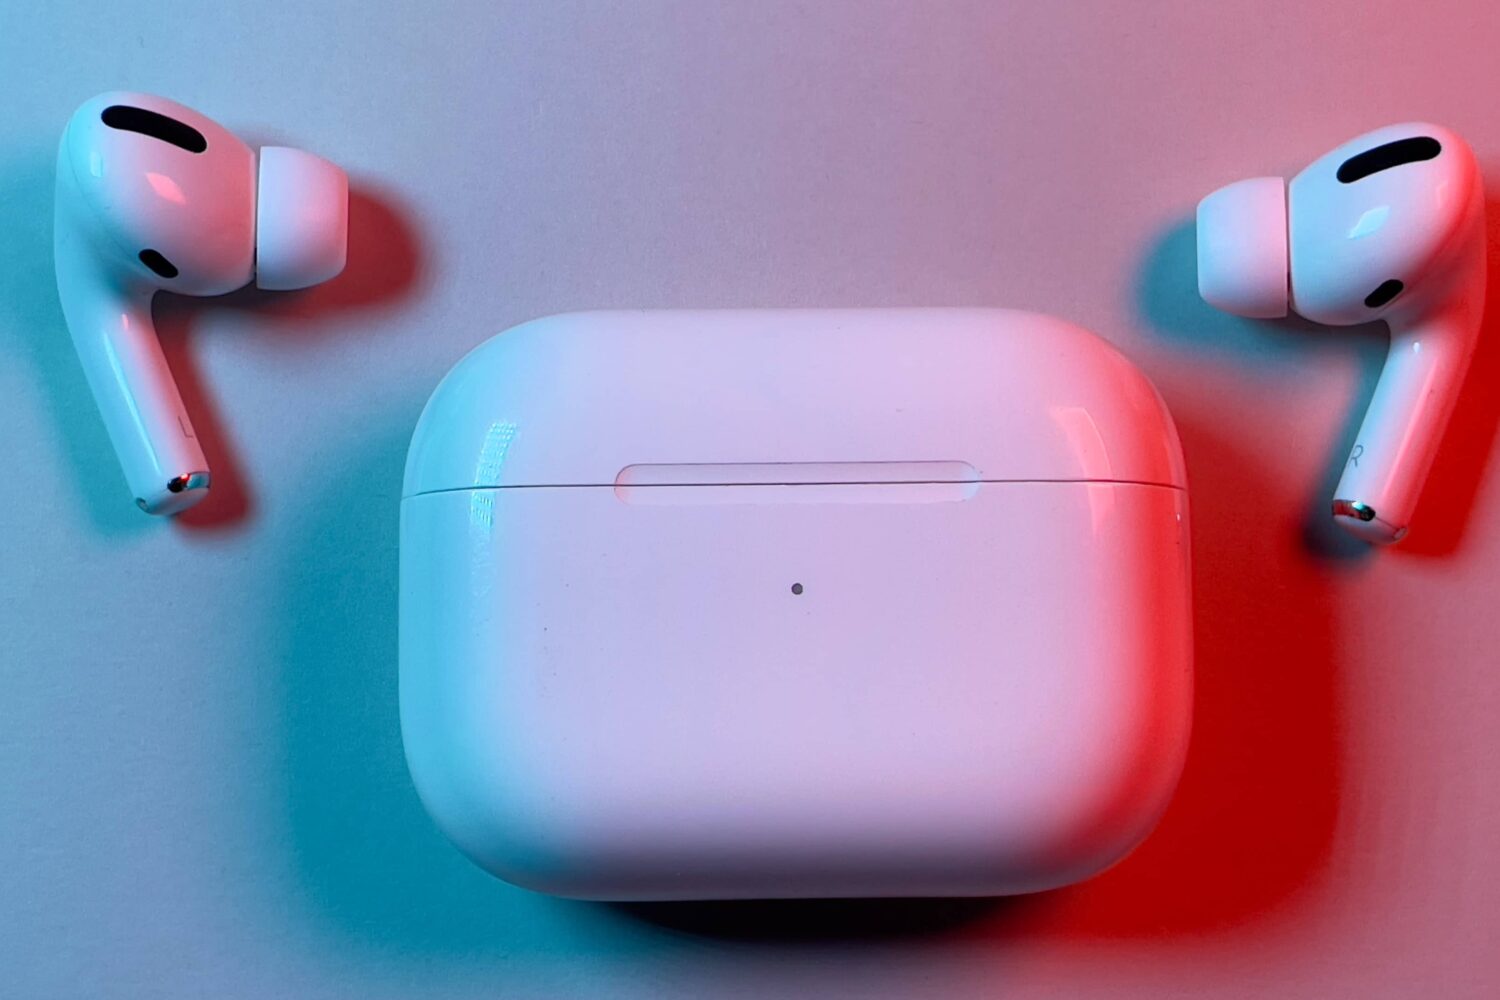 AirPods Pro earbuds lying next to a charging case with the lid closed